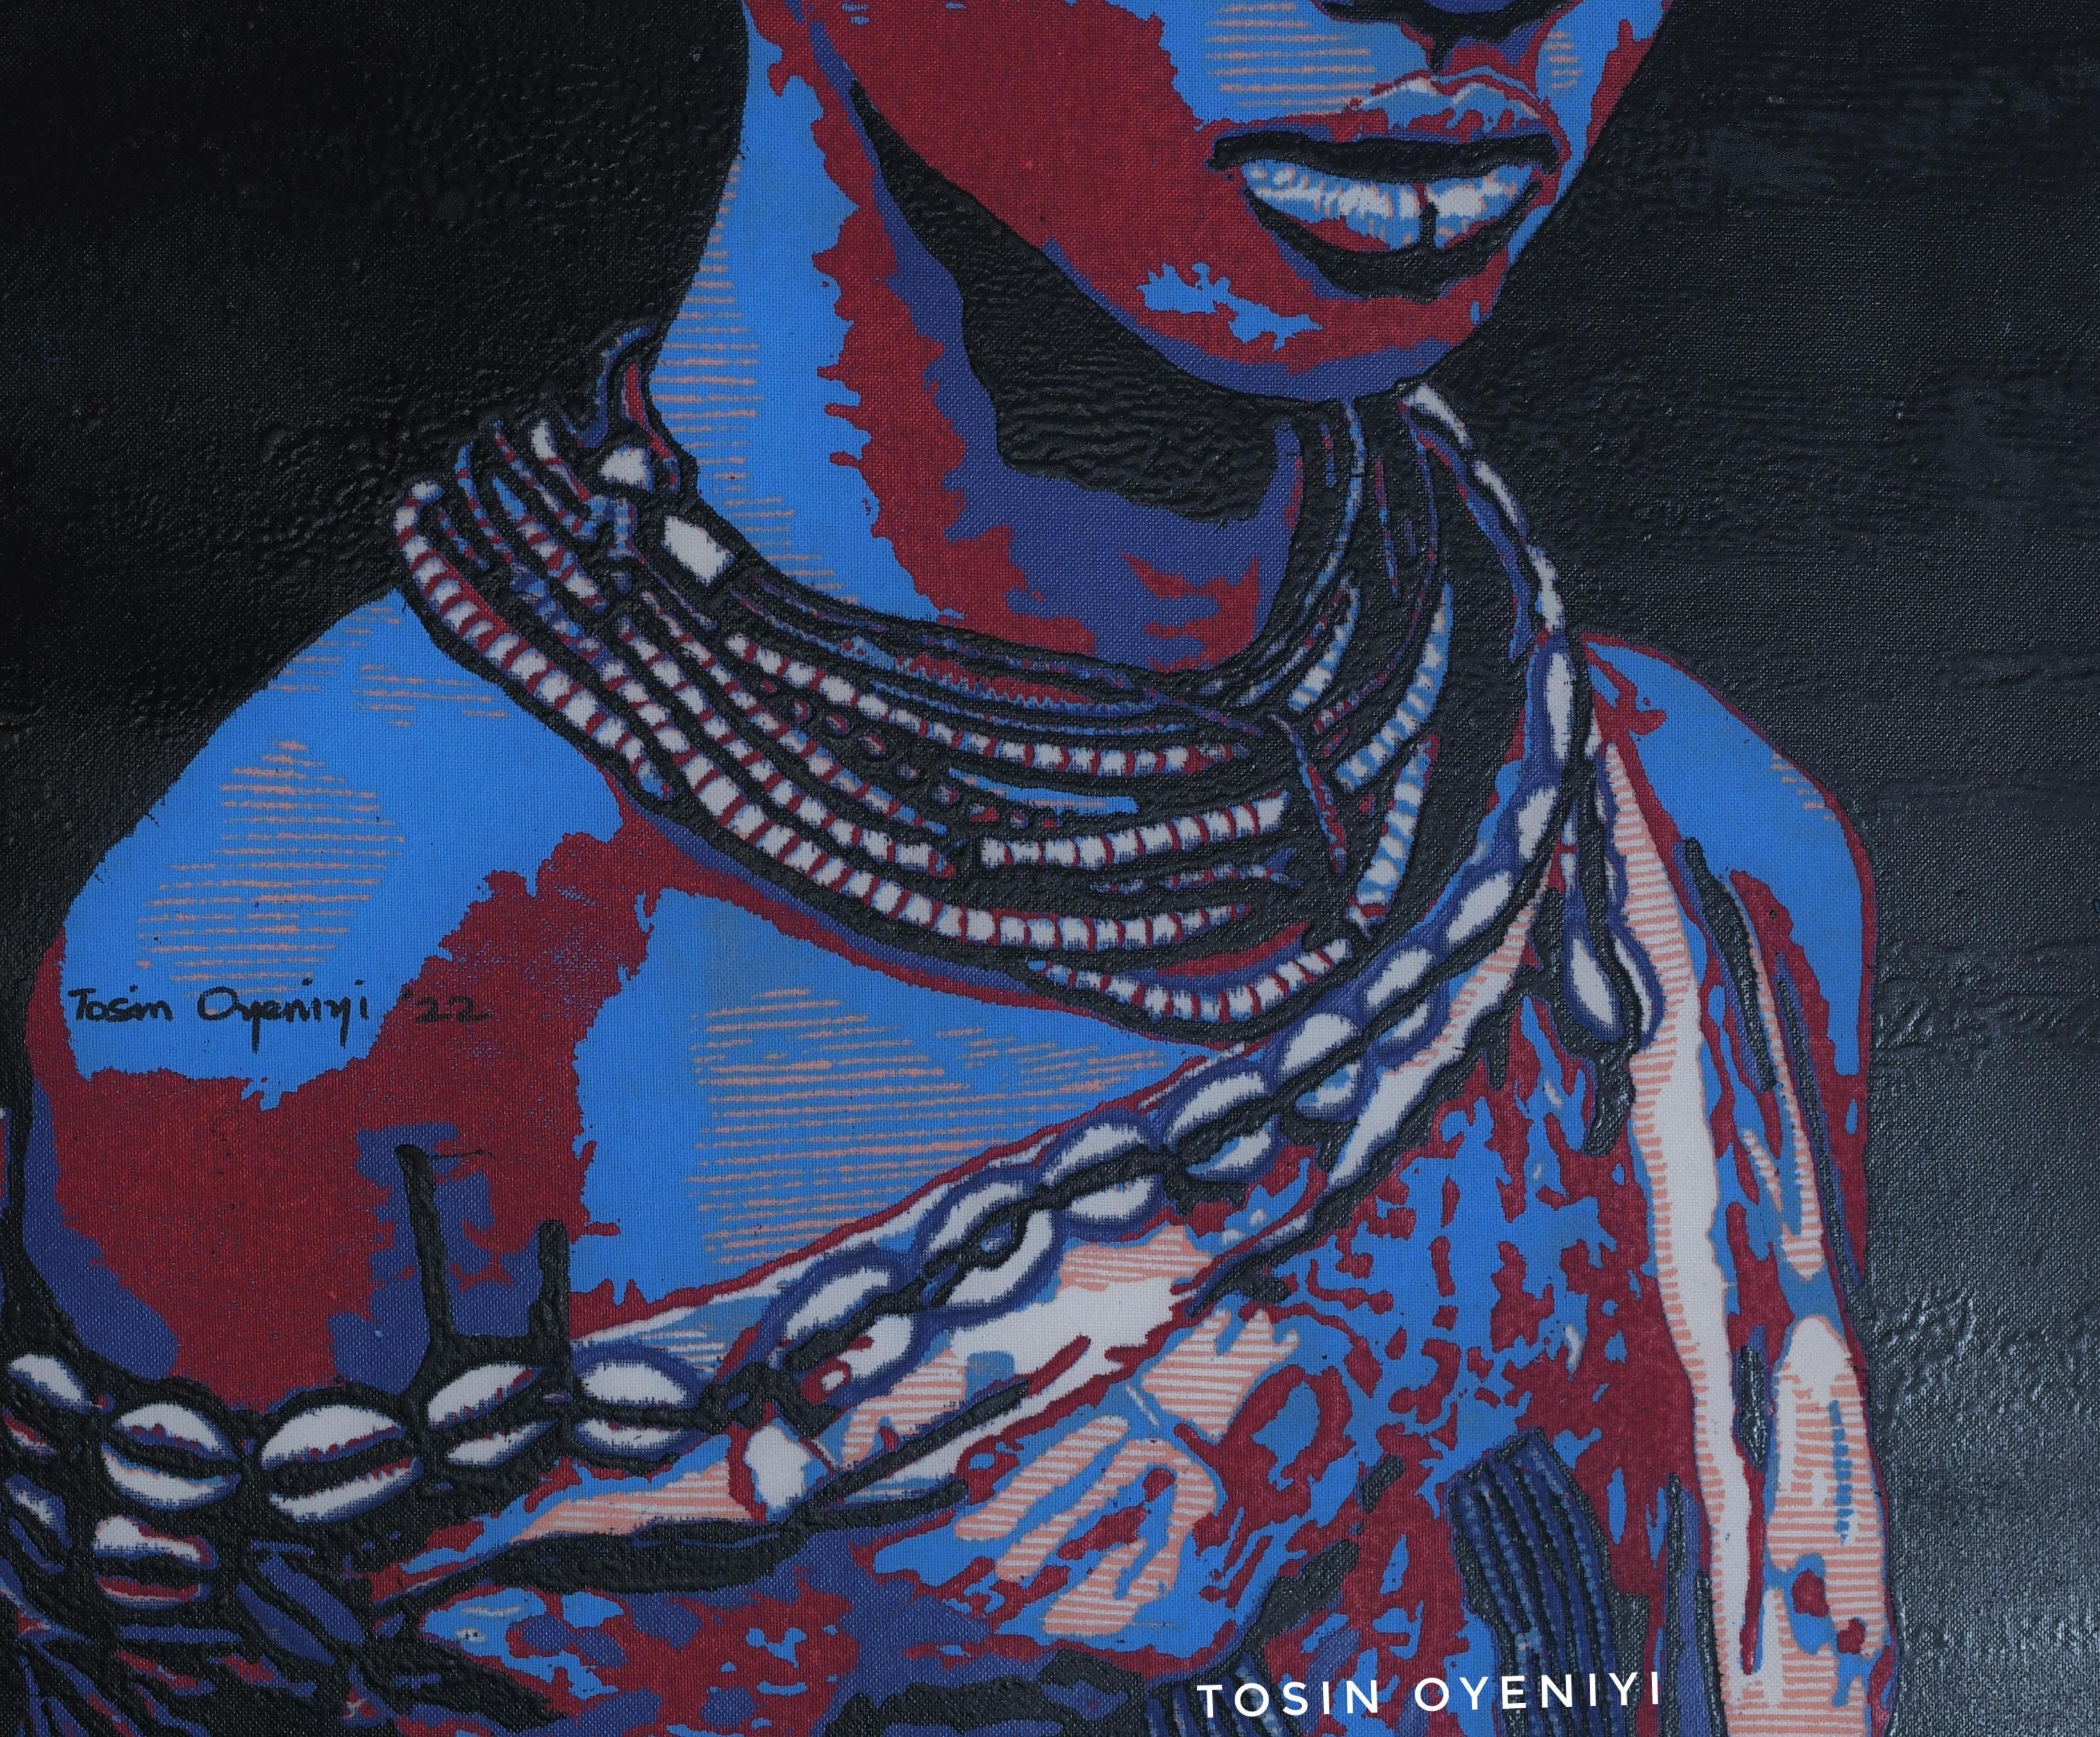 The Root (Cultural Heritage 3) - Contemporary Print by Tosin Oyeniyi 